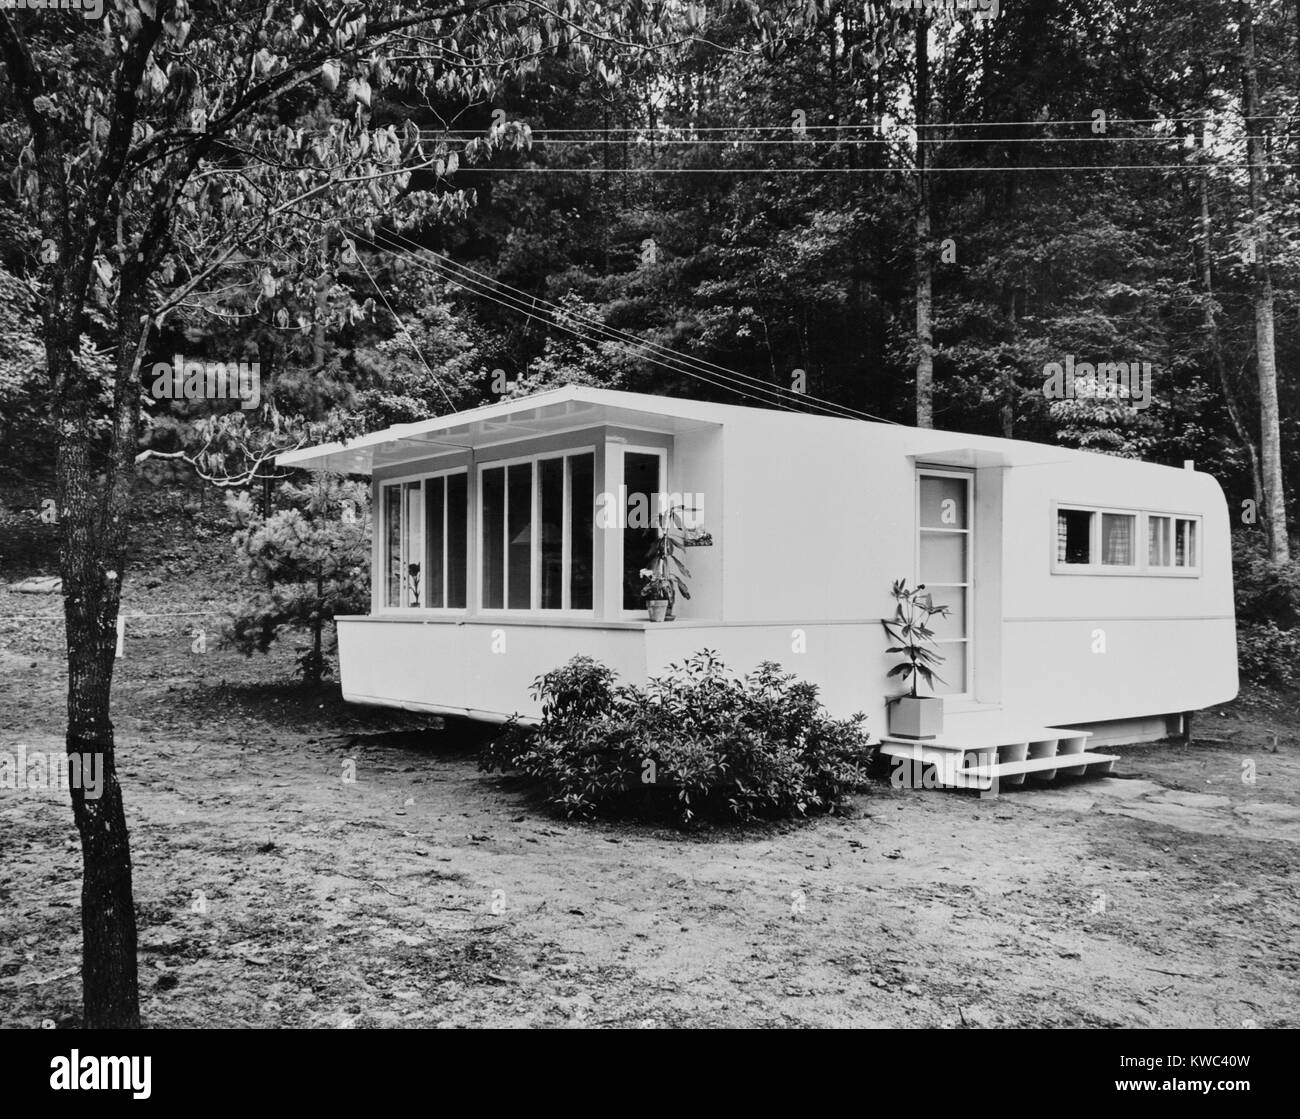 Prefabrication housing developed for TVA (Tennessee Valley Authority's) employees in 1930s. Buildings could be relocated to worksites as needed and were competitive in cost with traditionally constructed housing. (BSLOC 2015 14 229) Stock Photo